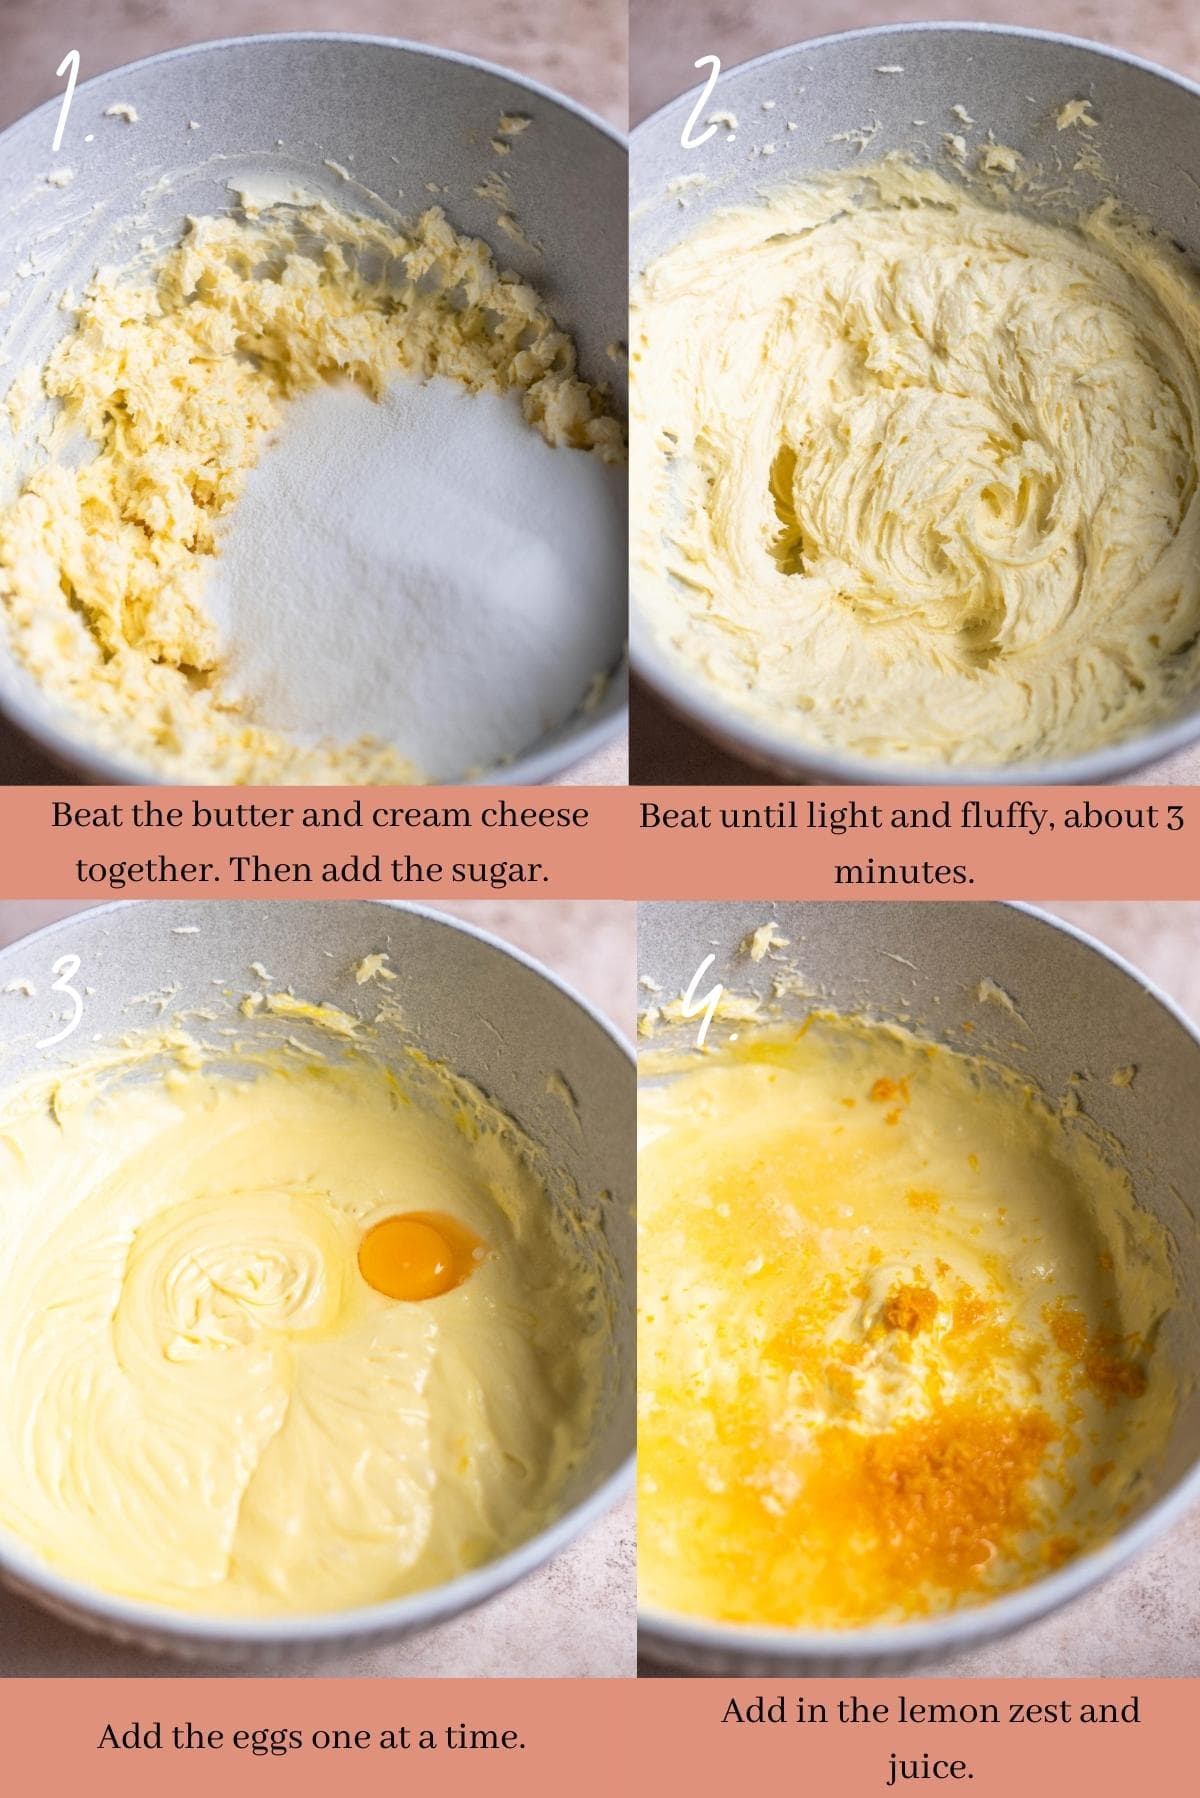 Collage showing how to make the lemon pound cake.